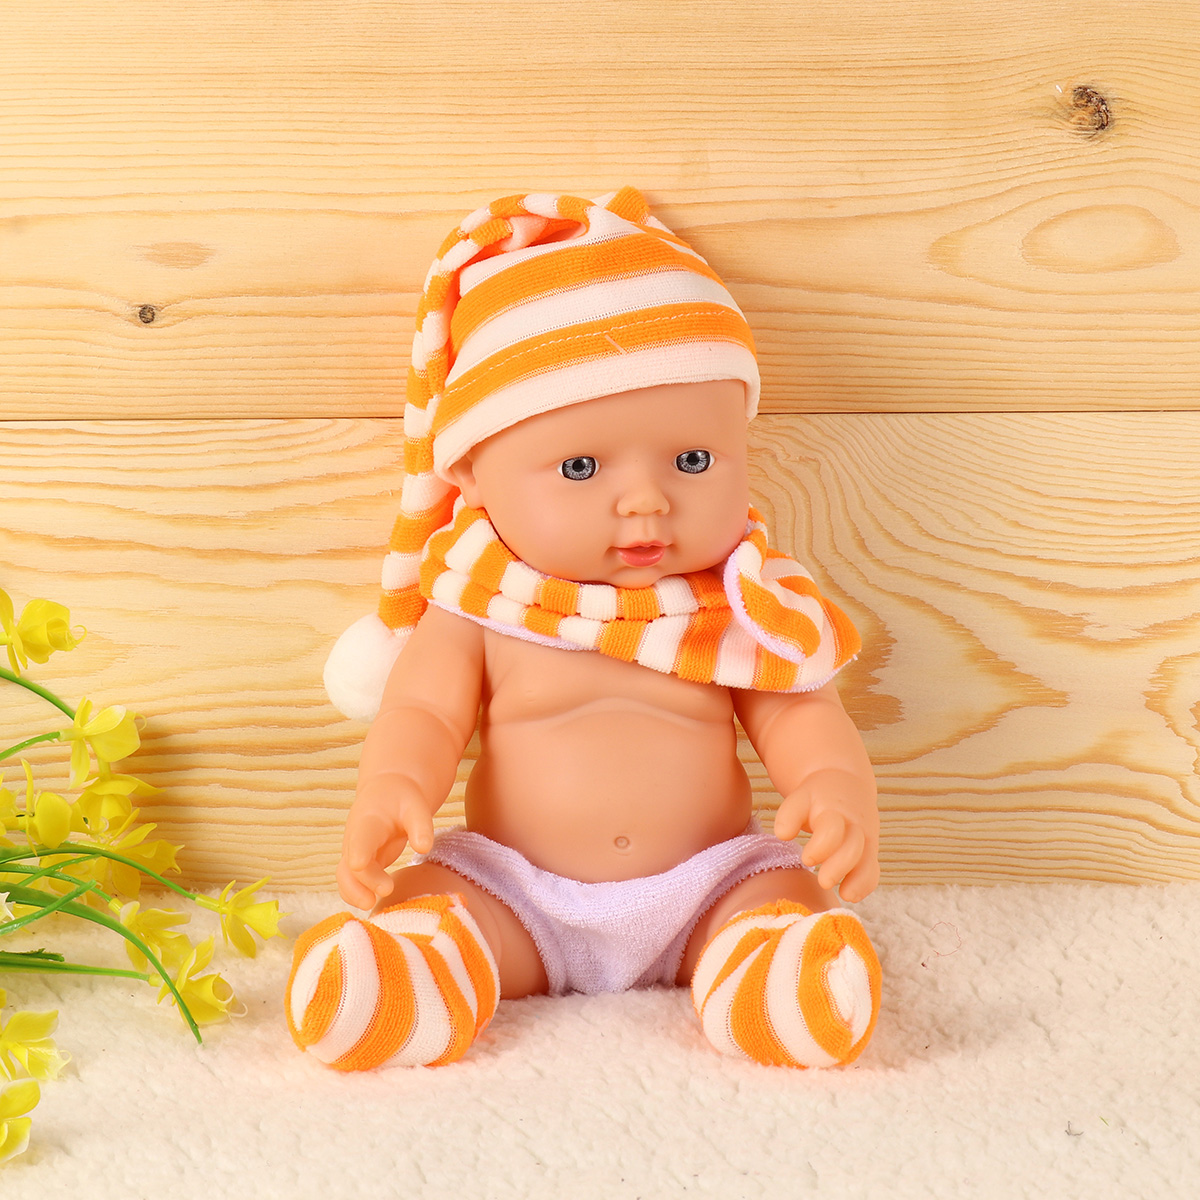 30CM-Height-Simulation-Soft-Silicone-Vinyl-Joint-Removable-Washable-Reborn-Baby-Doll-Toy-for-Kids-Bi-1812138-11